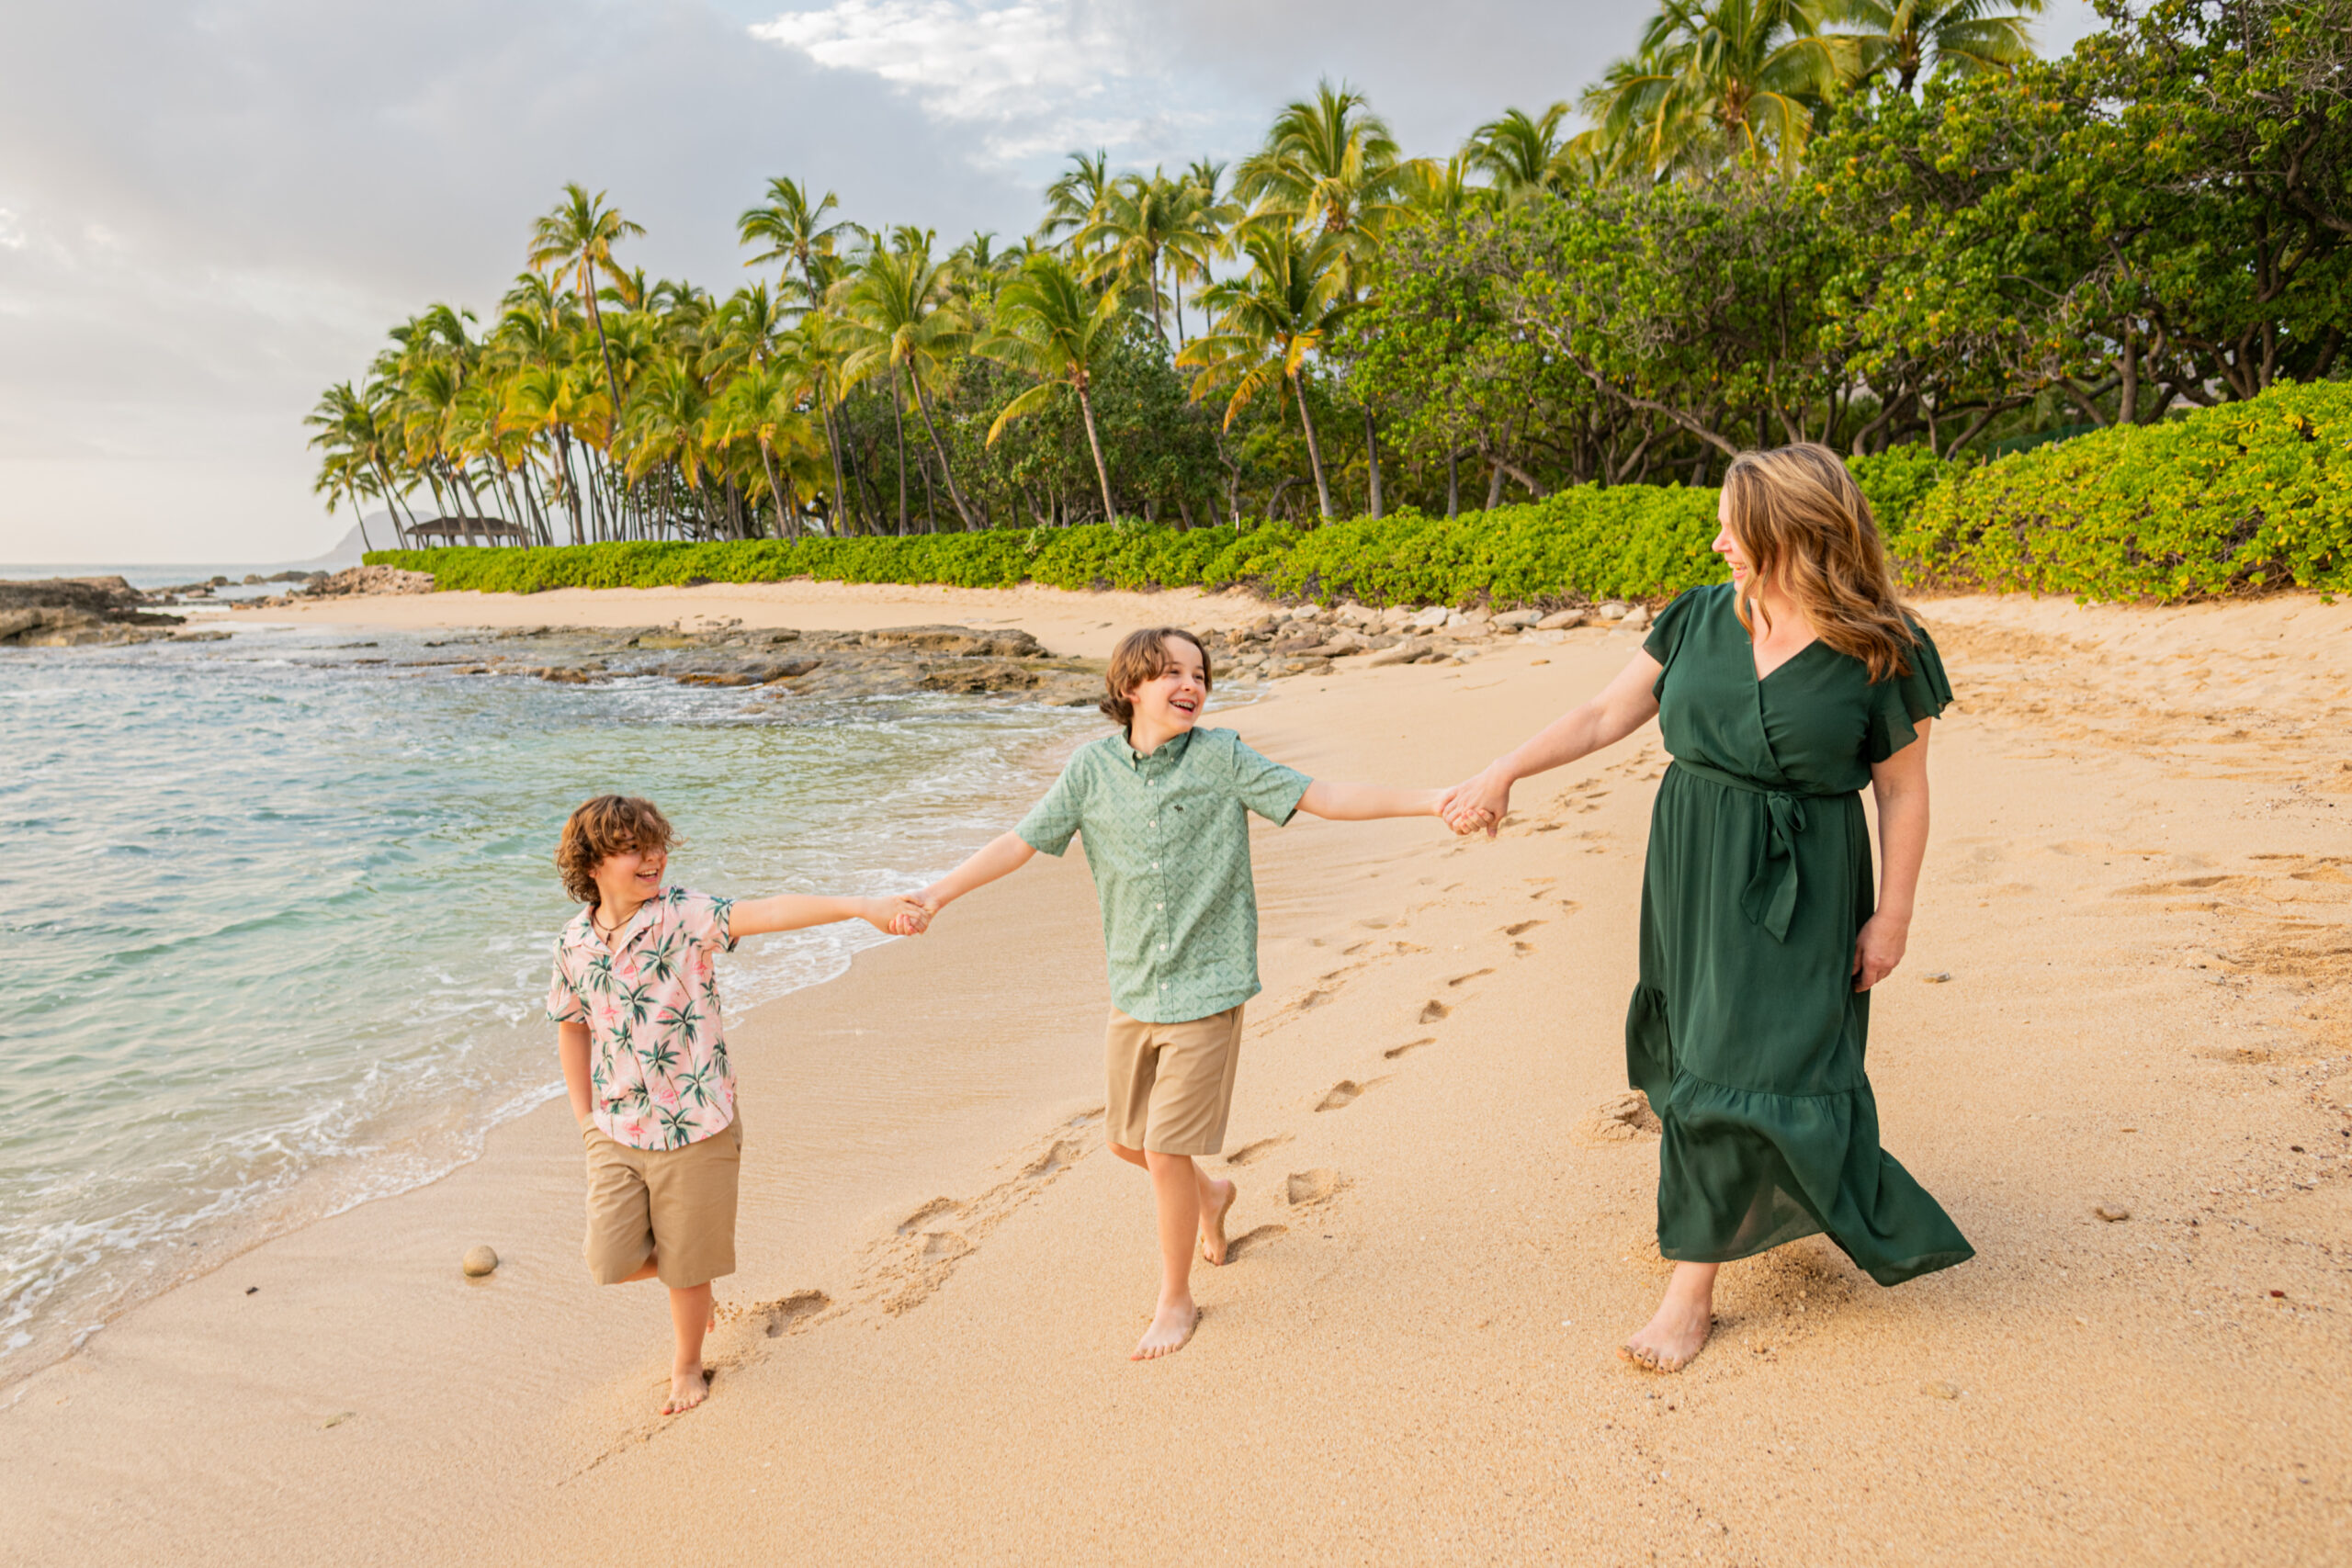 Mom and two boys are looking at each other on the beach during their Hawaii vacation photoshoot